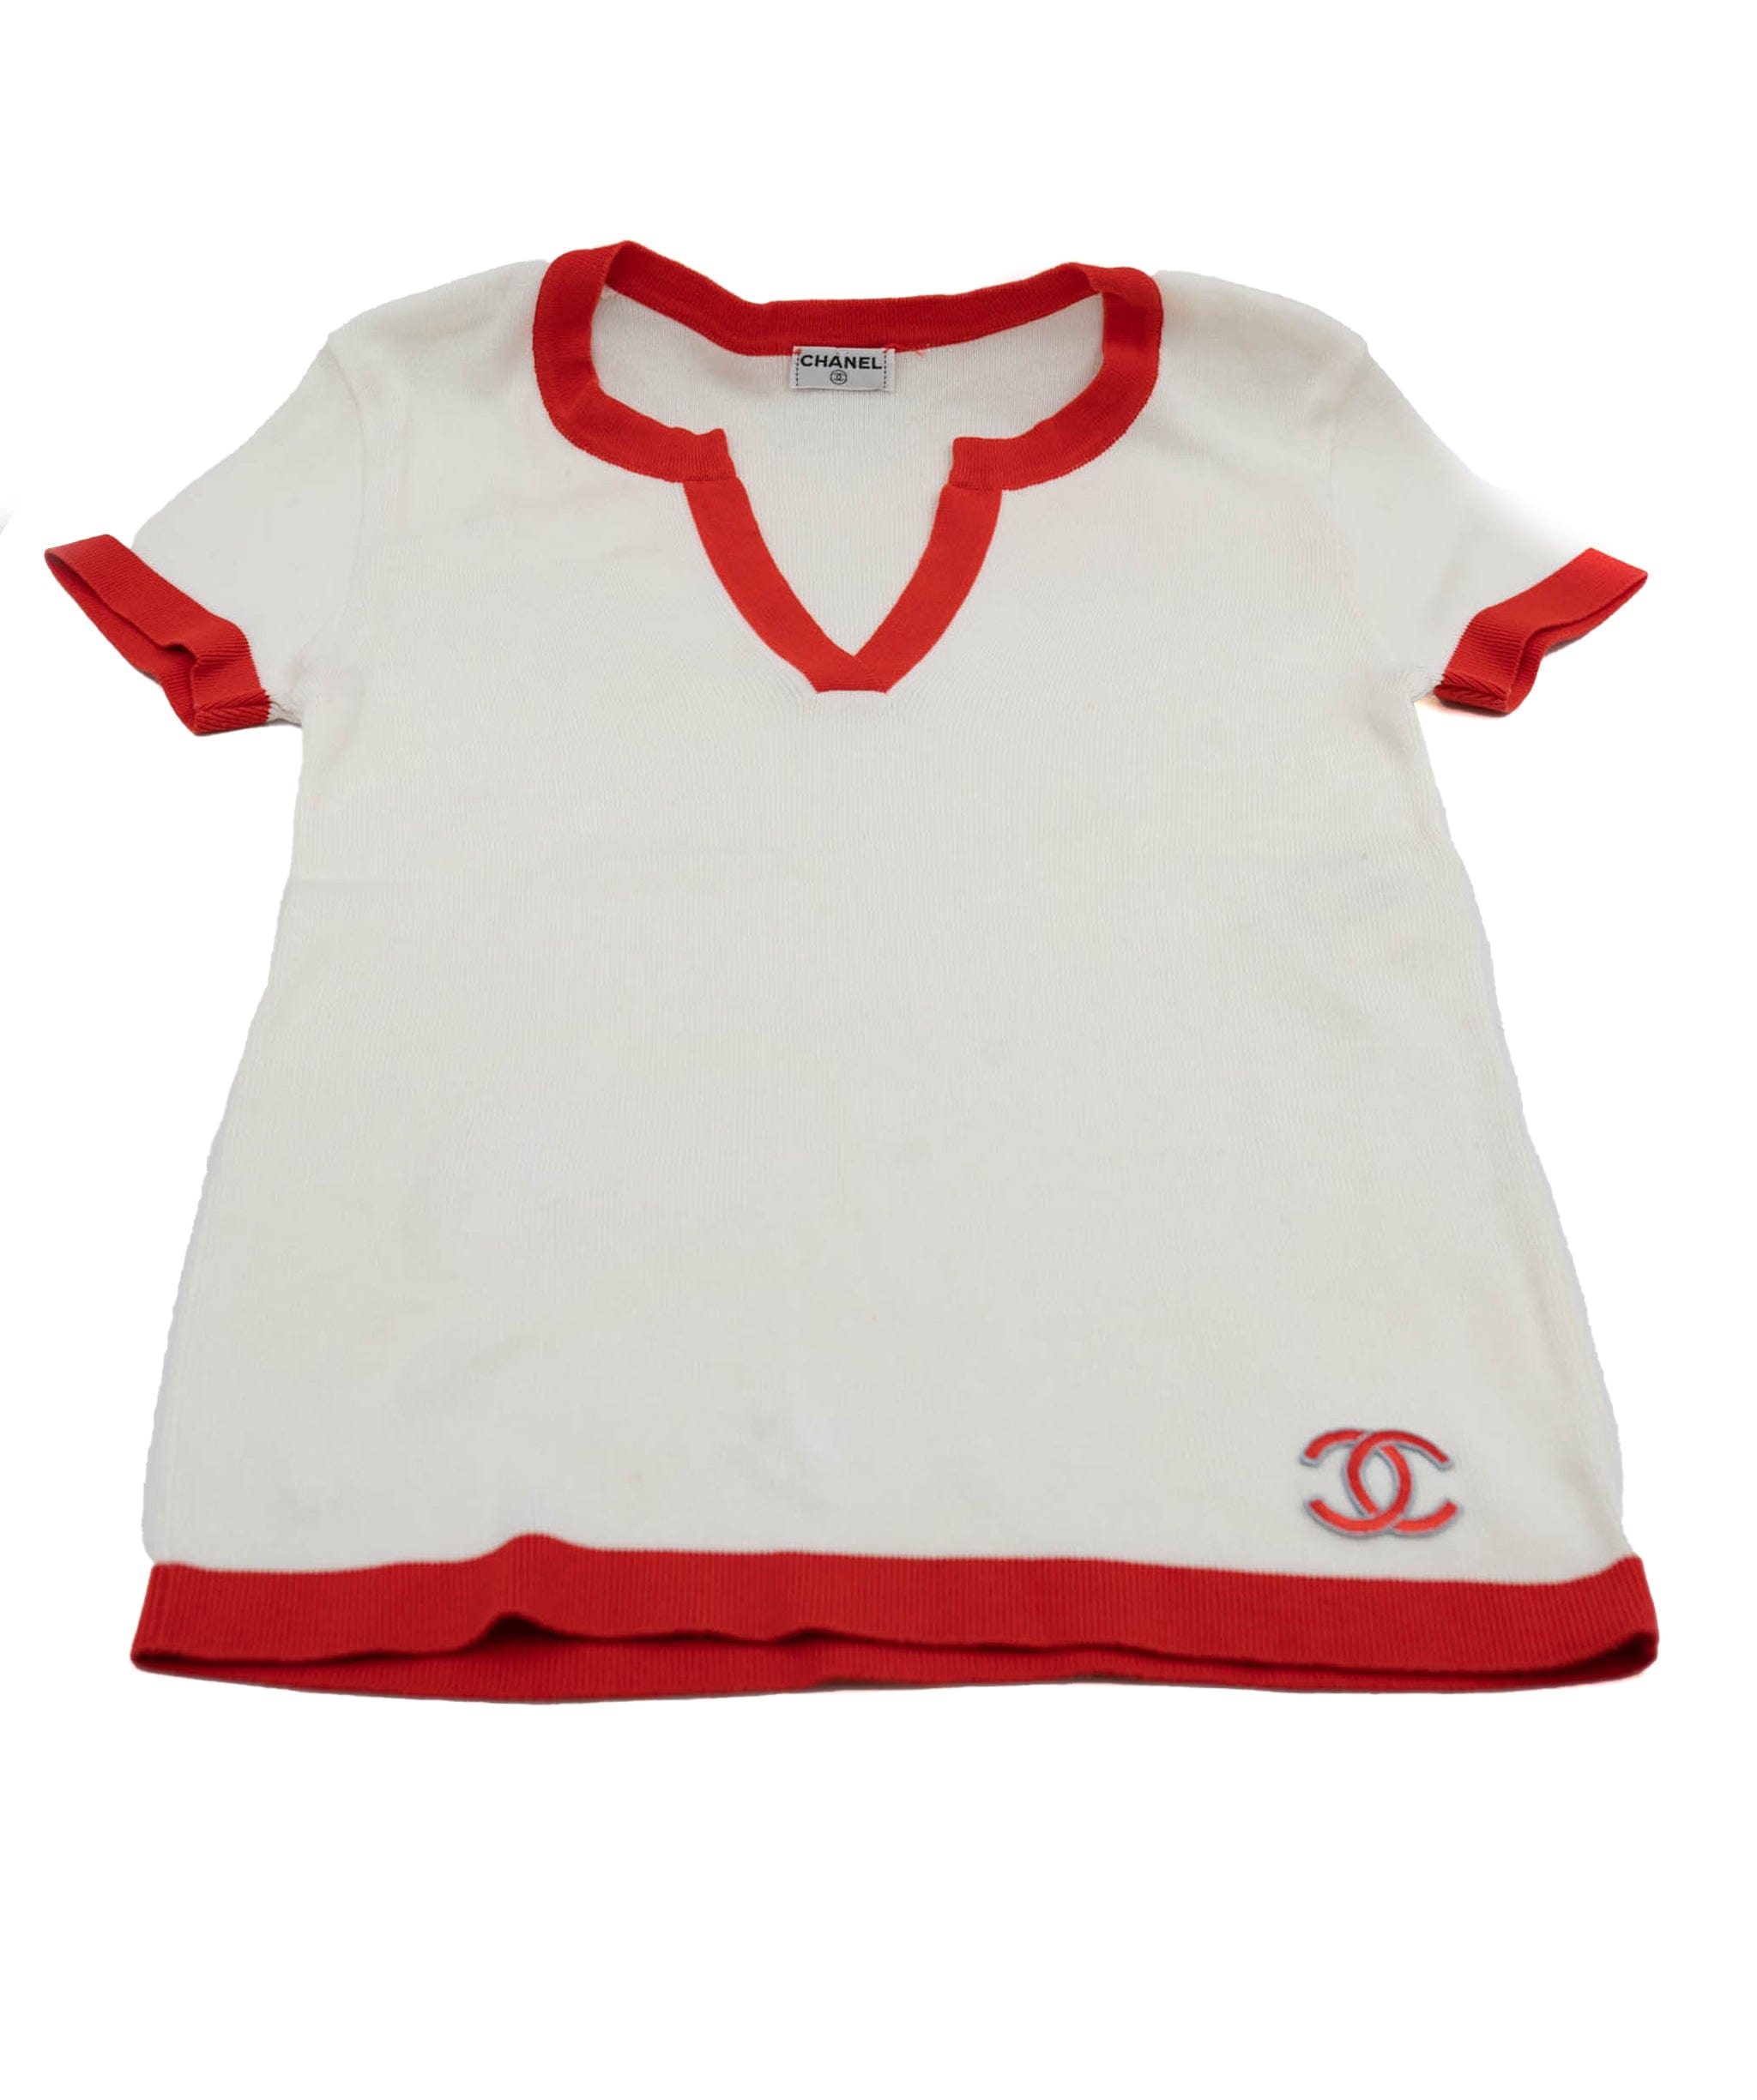 Chanel Chanel 02S Summer Knit Top White Red ASL4638